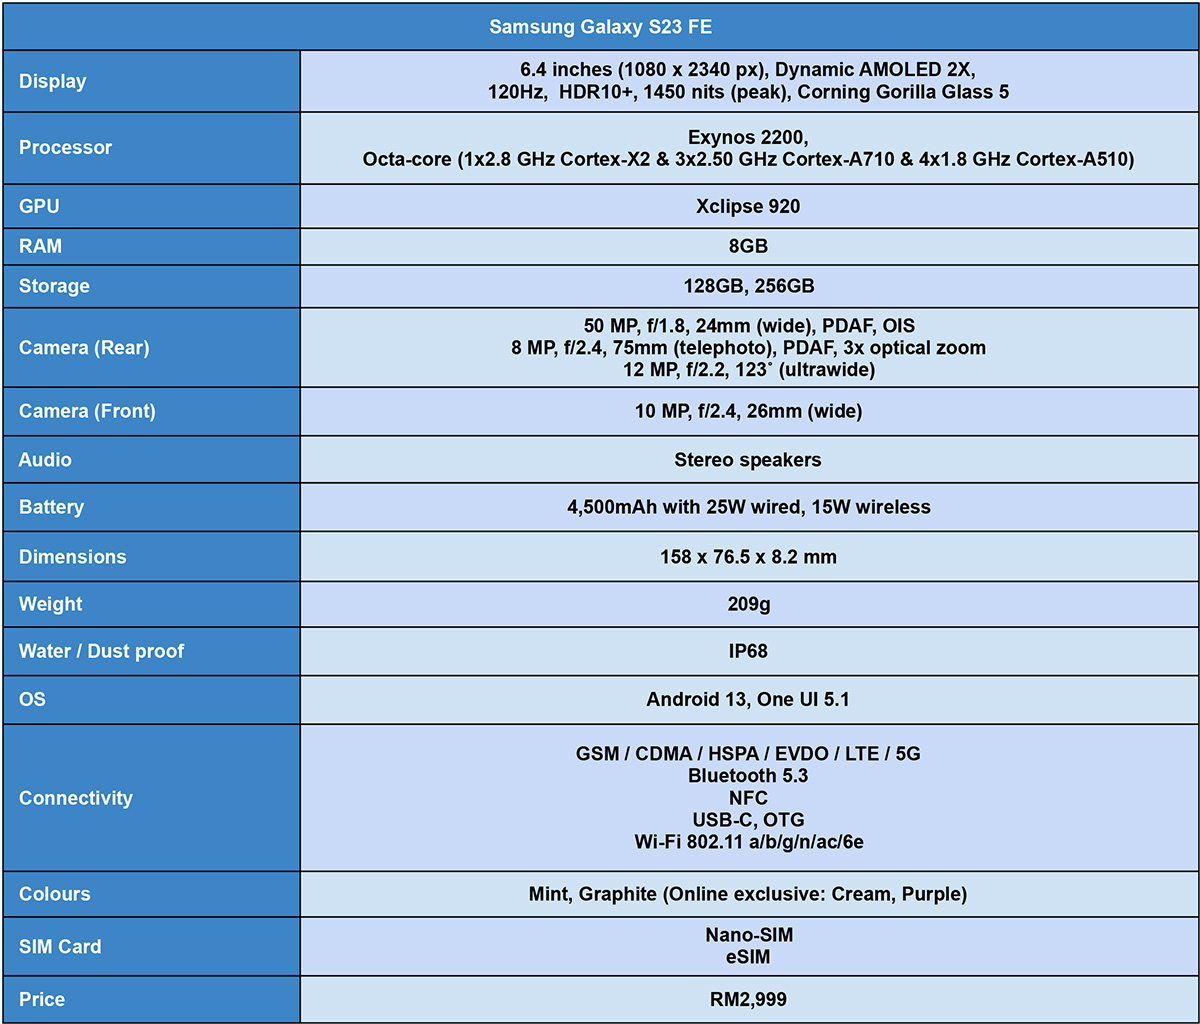 Specifications for the new Galaxy S23 FE